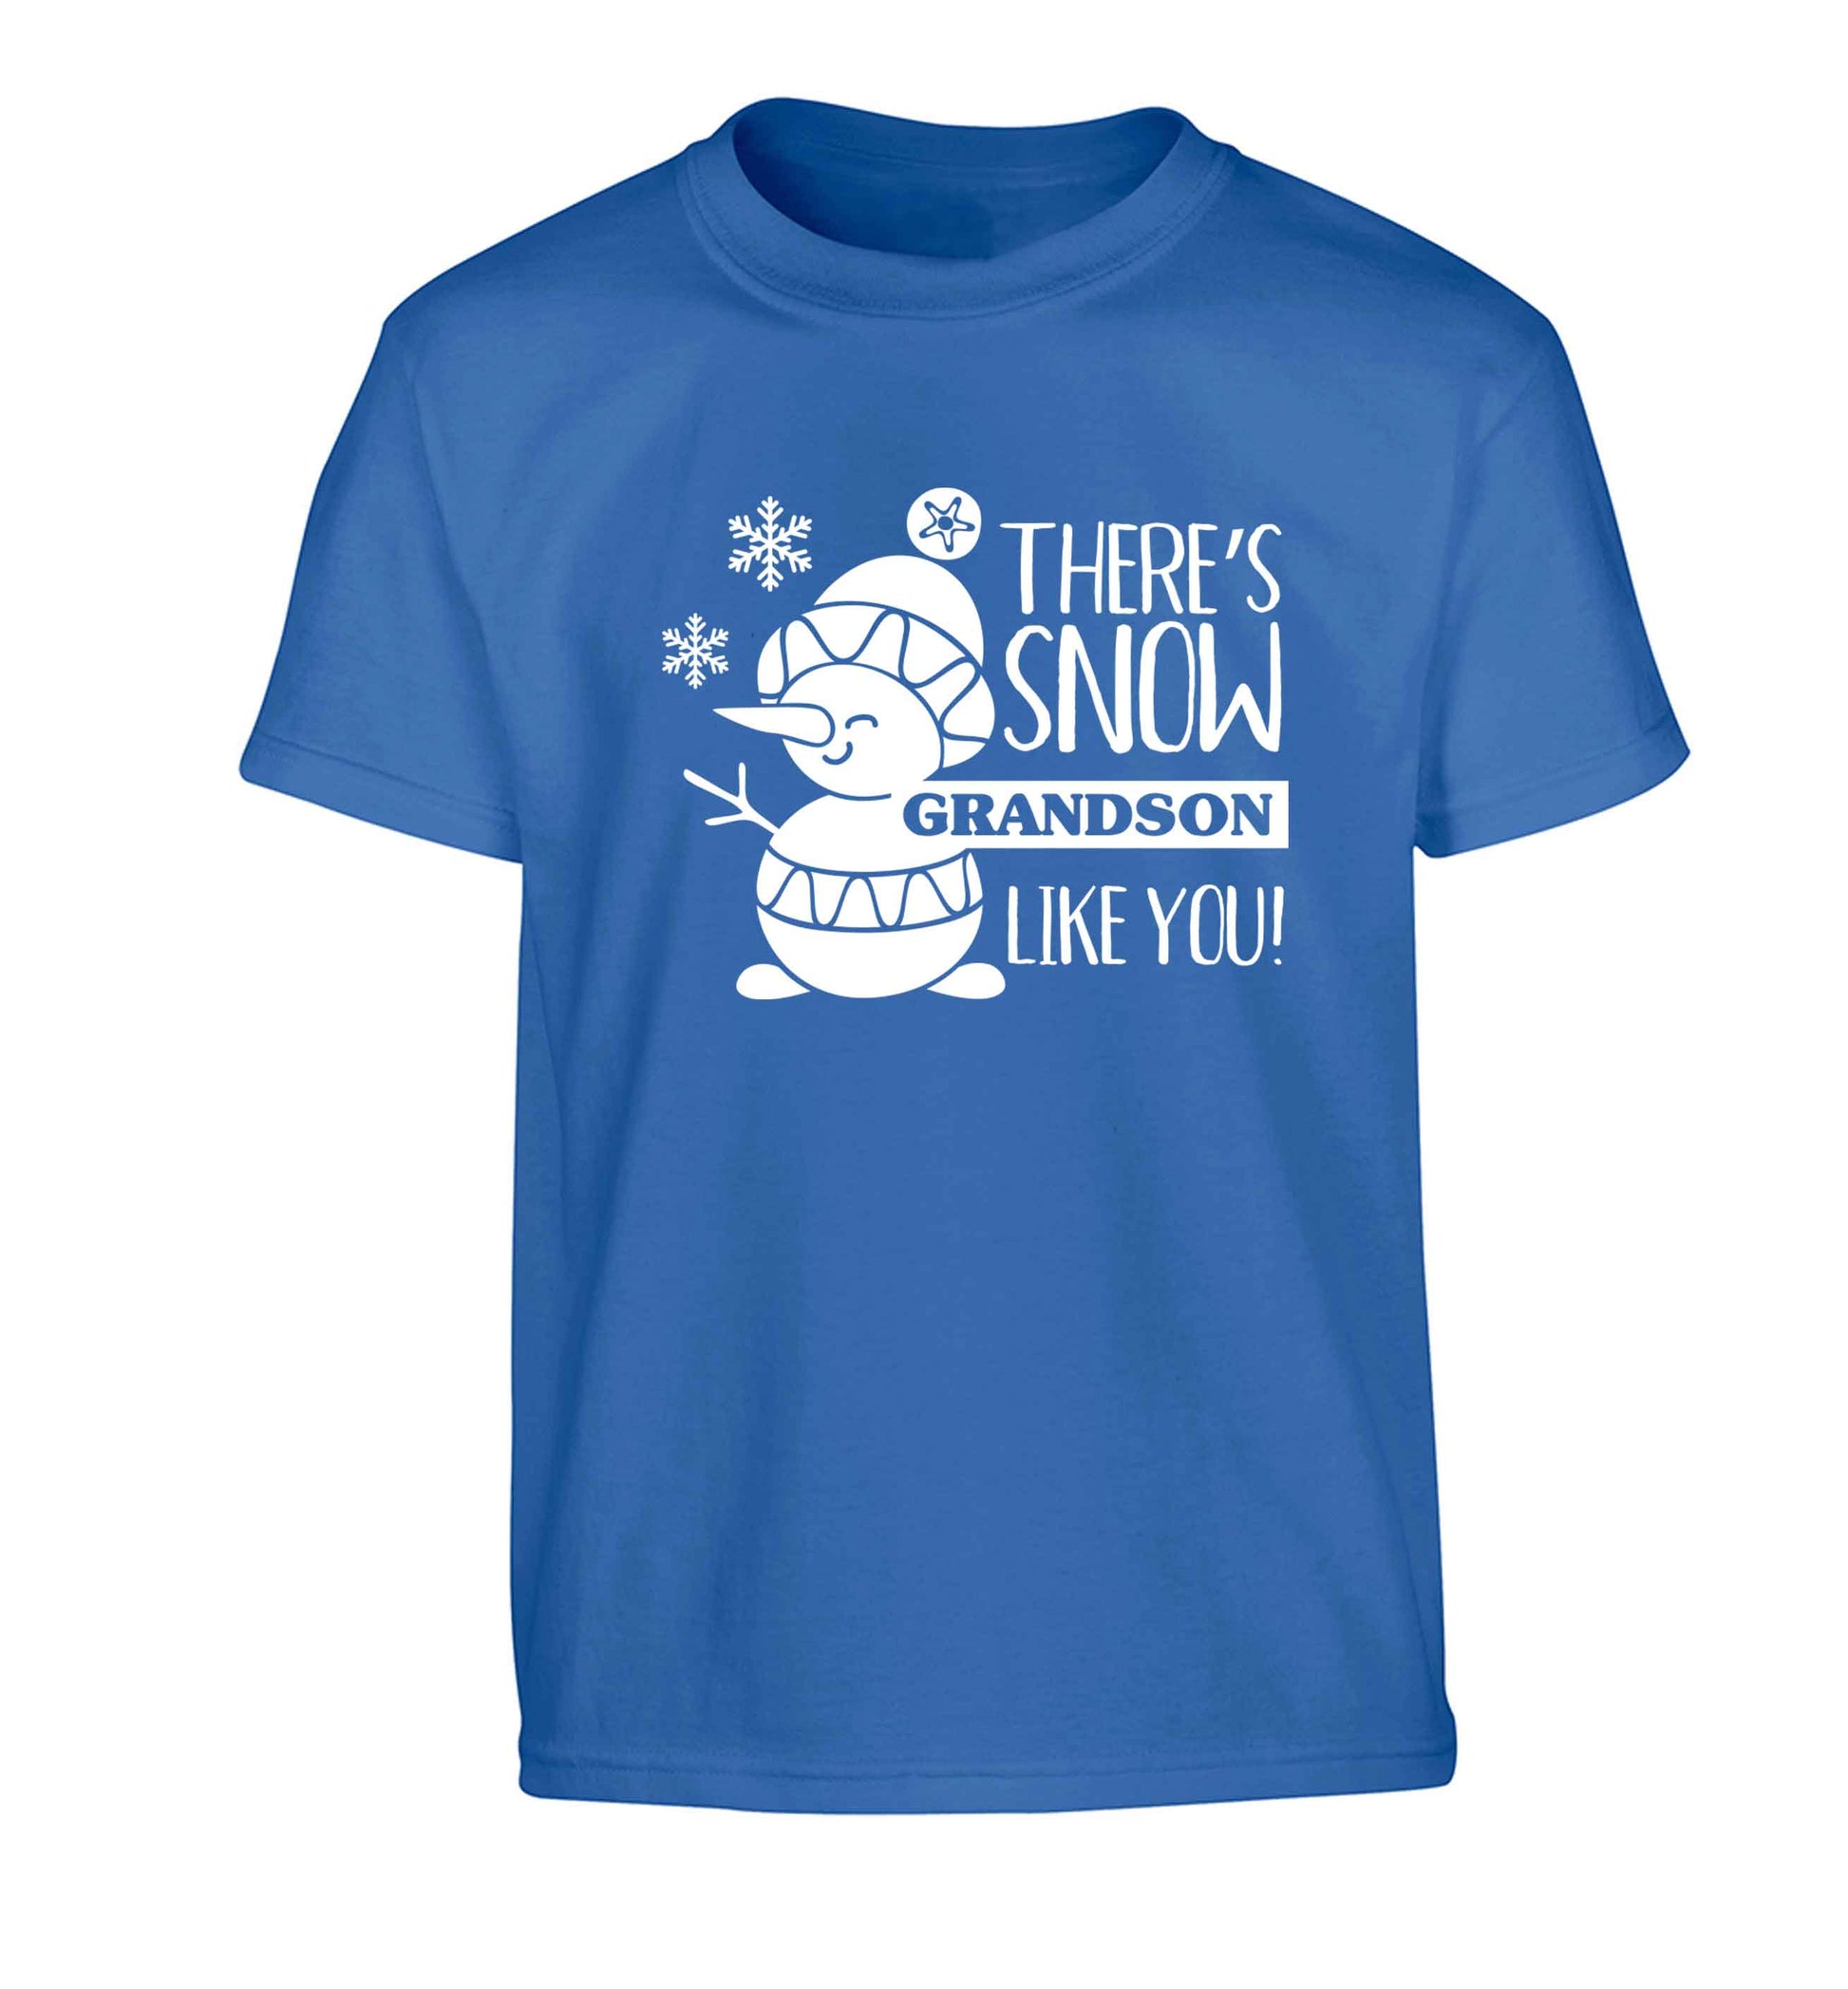 There's snow grandson like you Children's blue Tshirt 12-13 Years